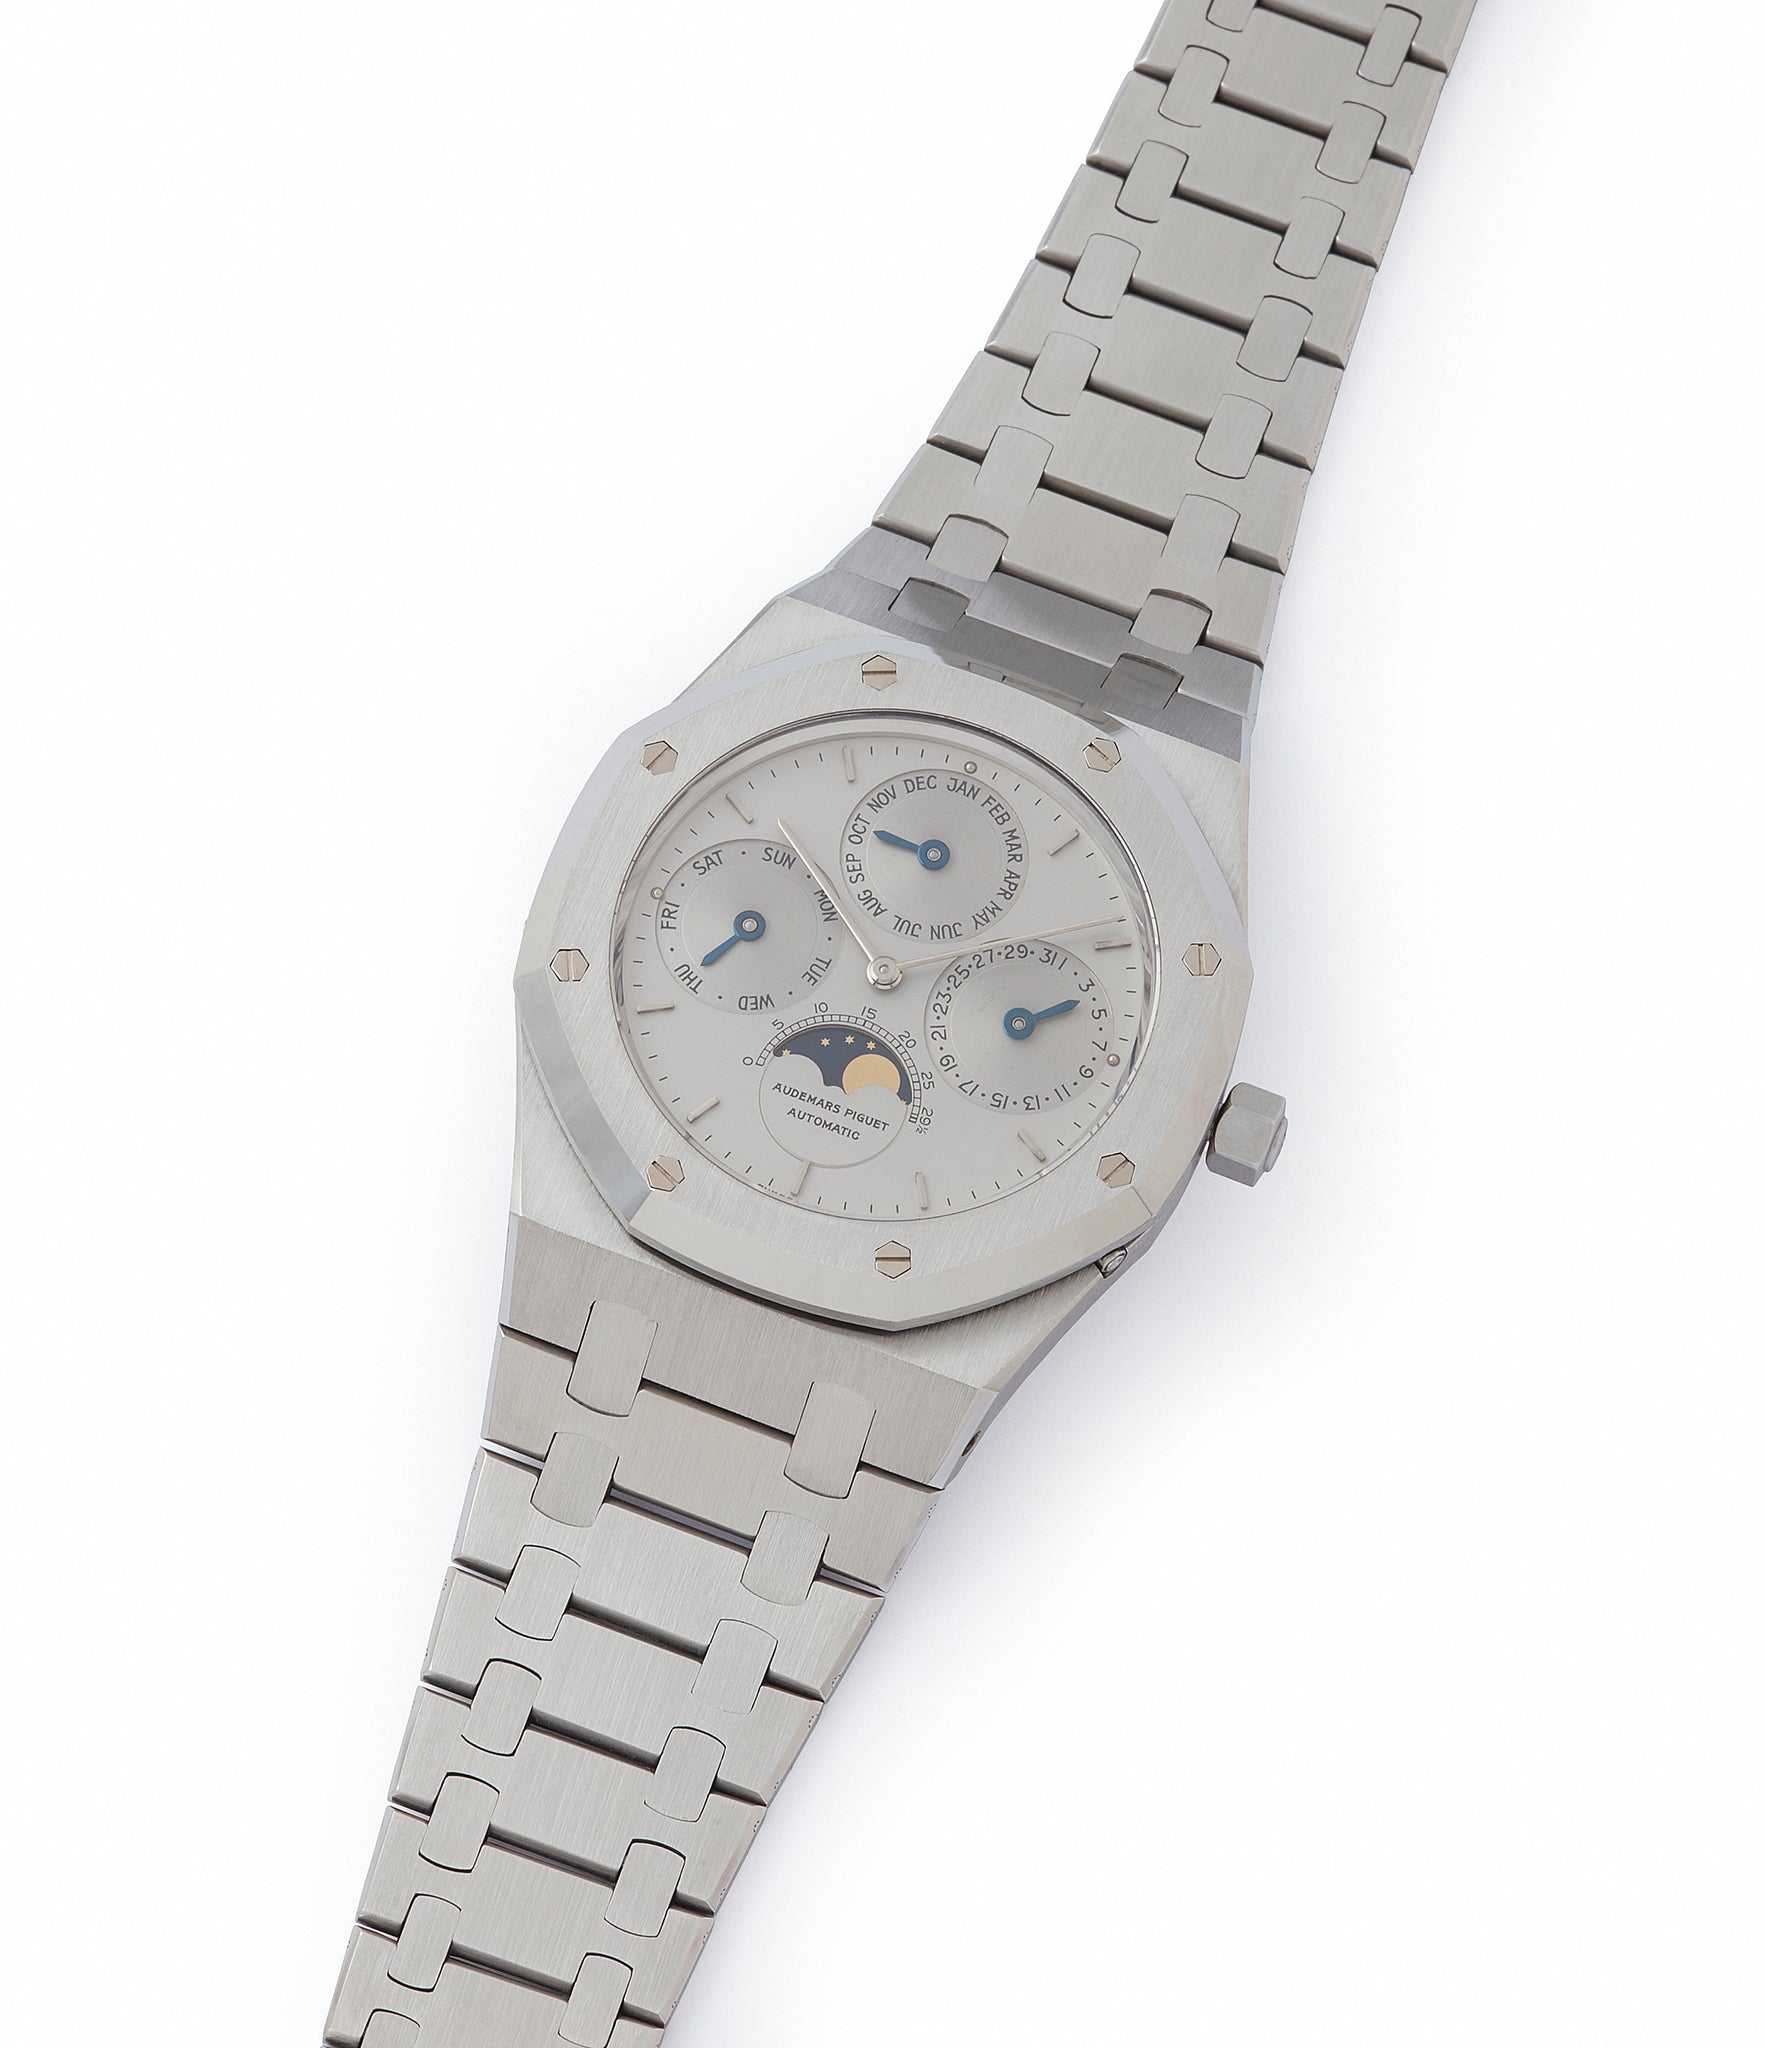 for sale Audemars Piguet Royal Oak Perpetual Calendar 25654ST steel vintage watch for sale online at A Collected Man London UK specialist of rare watches